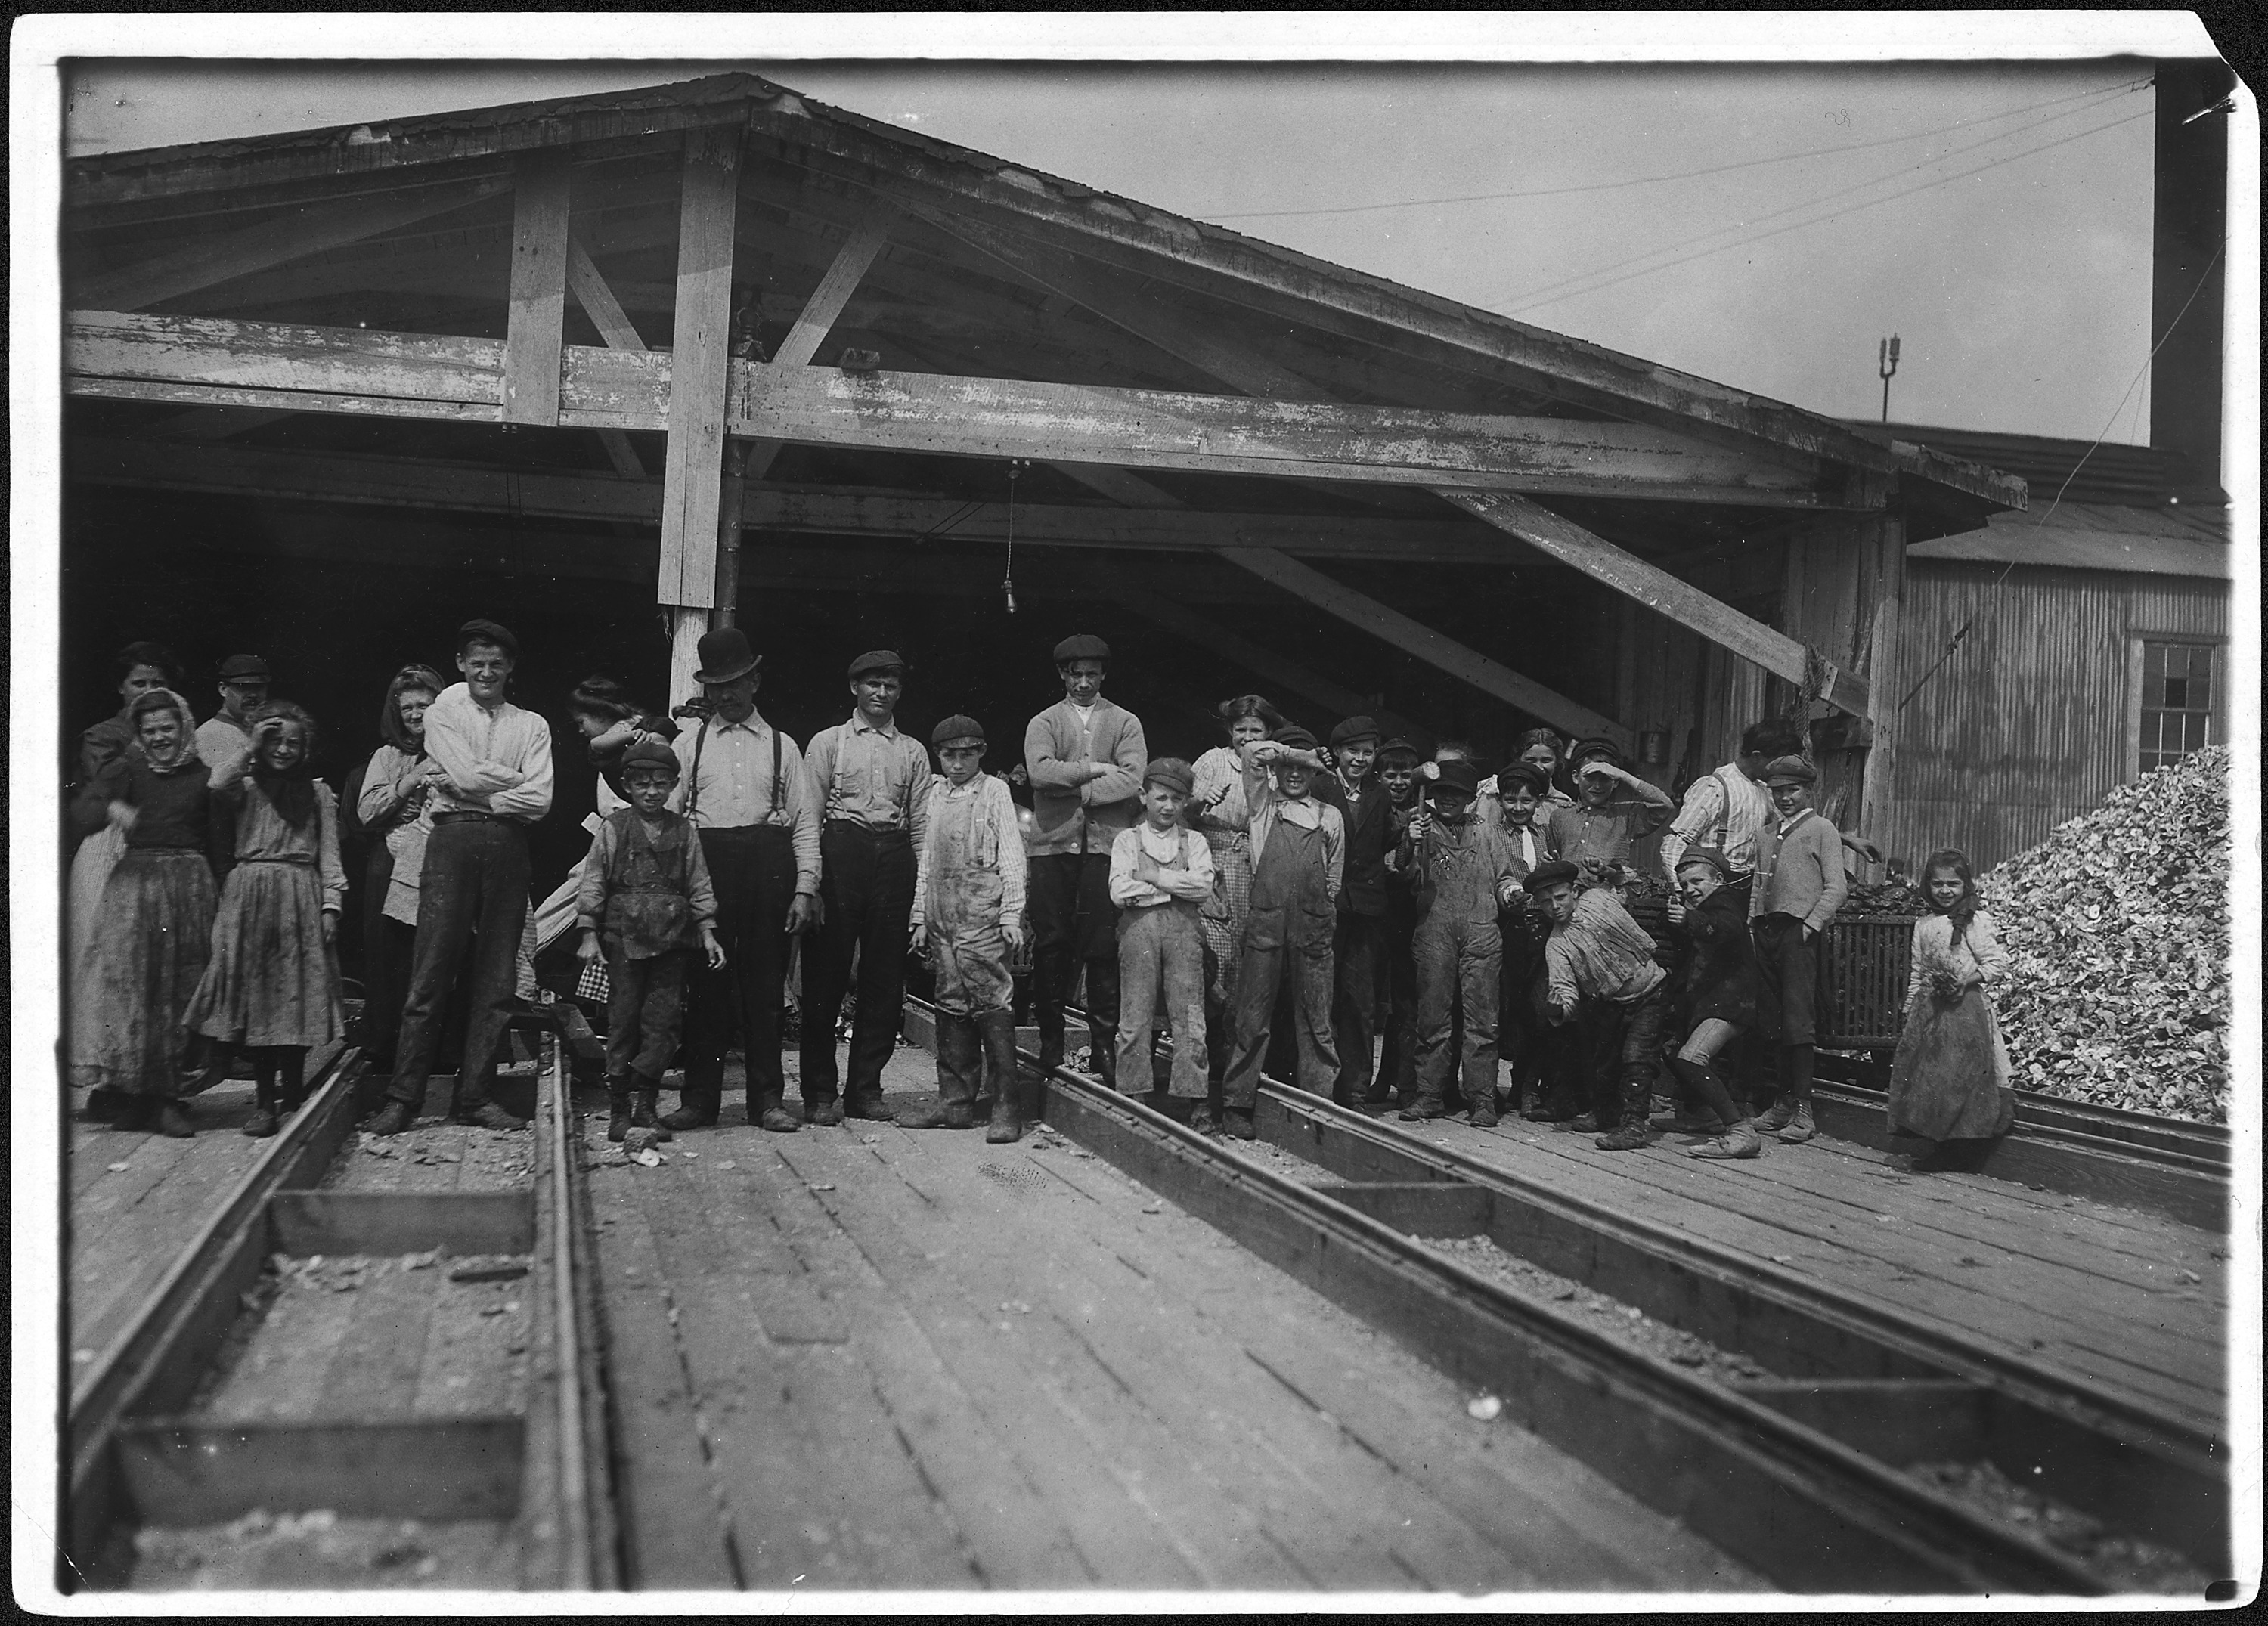 A few of the young oyster shuckers at the Pass Packing Co. Pass Christian, Miss. - NARA - 523407